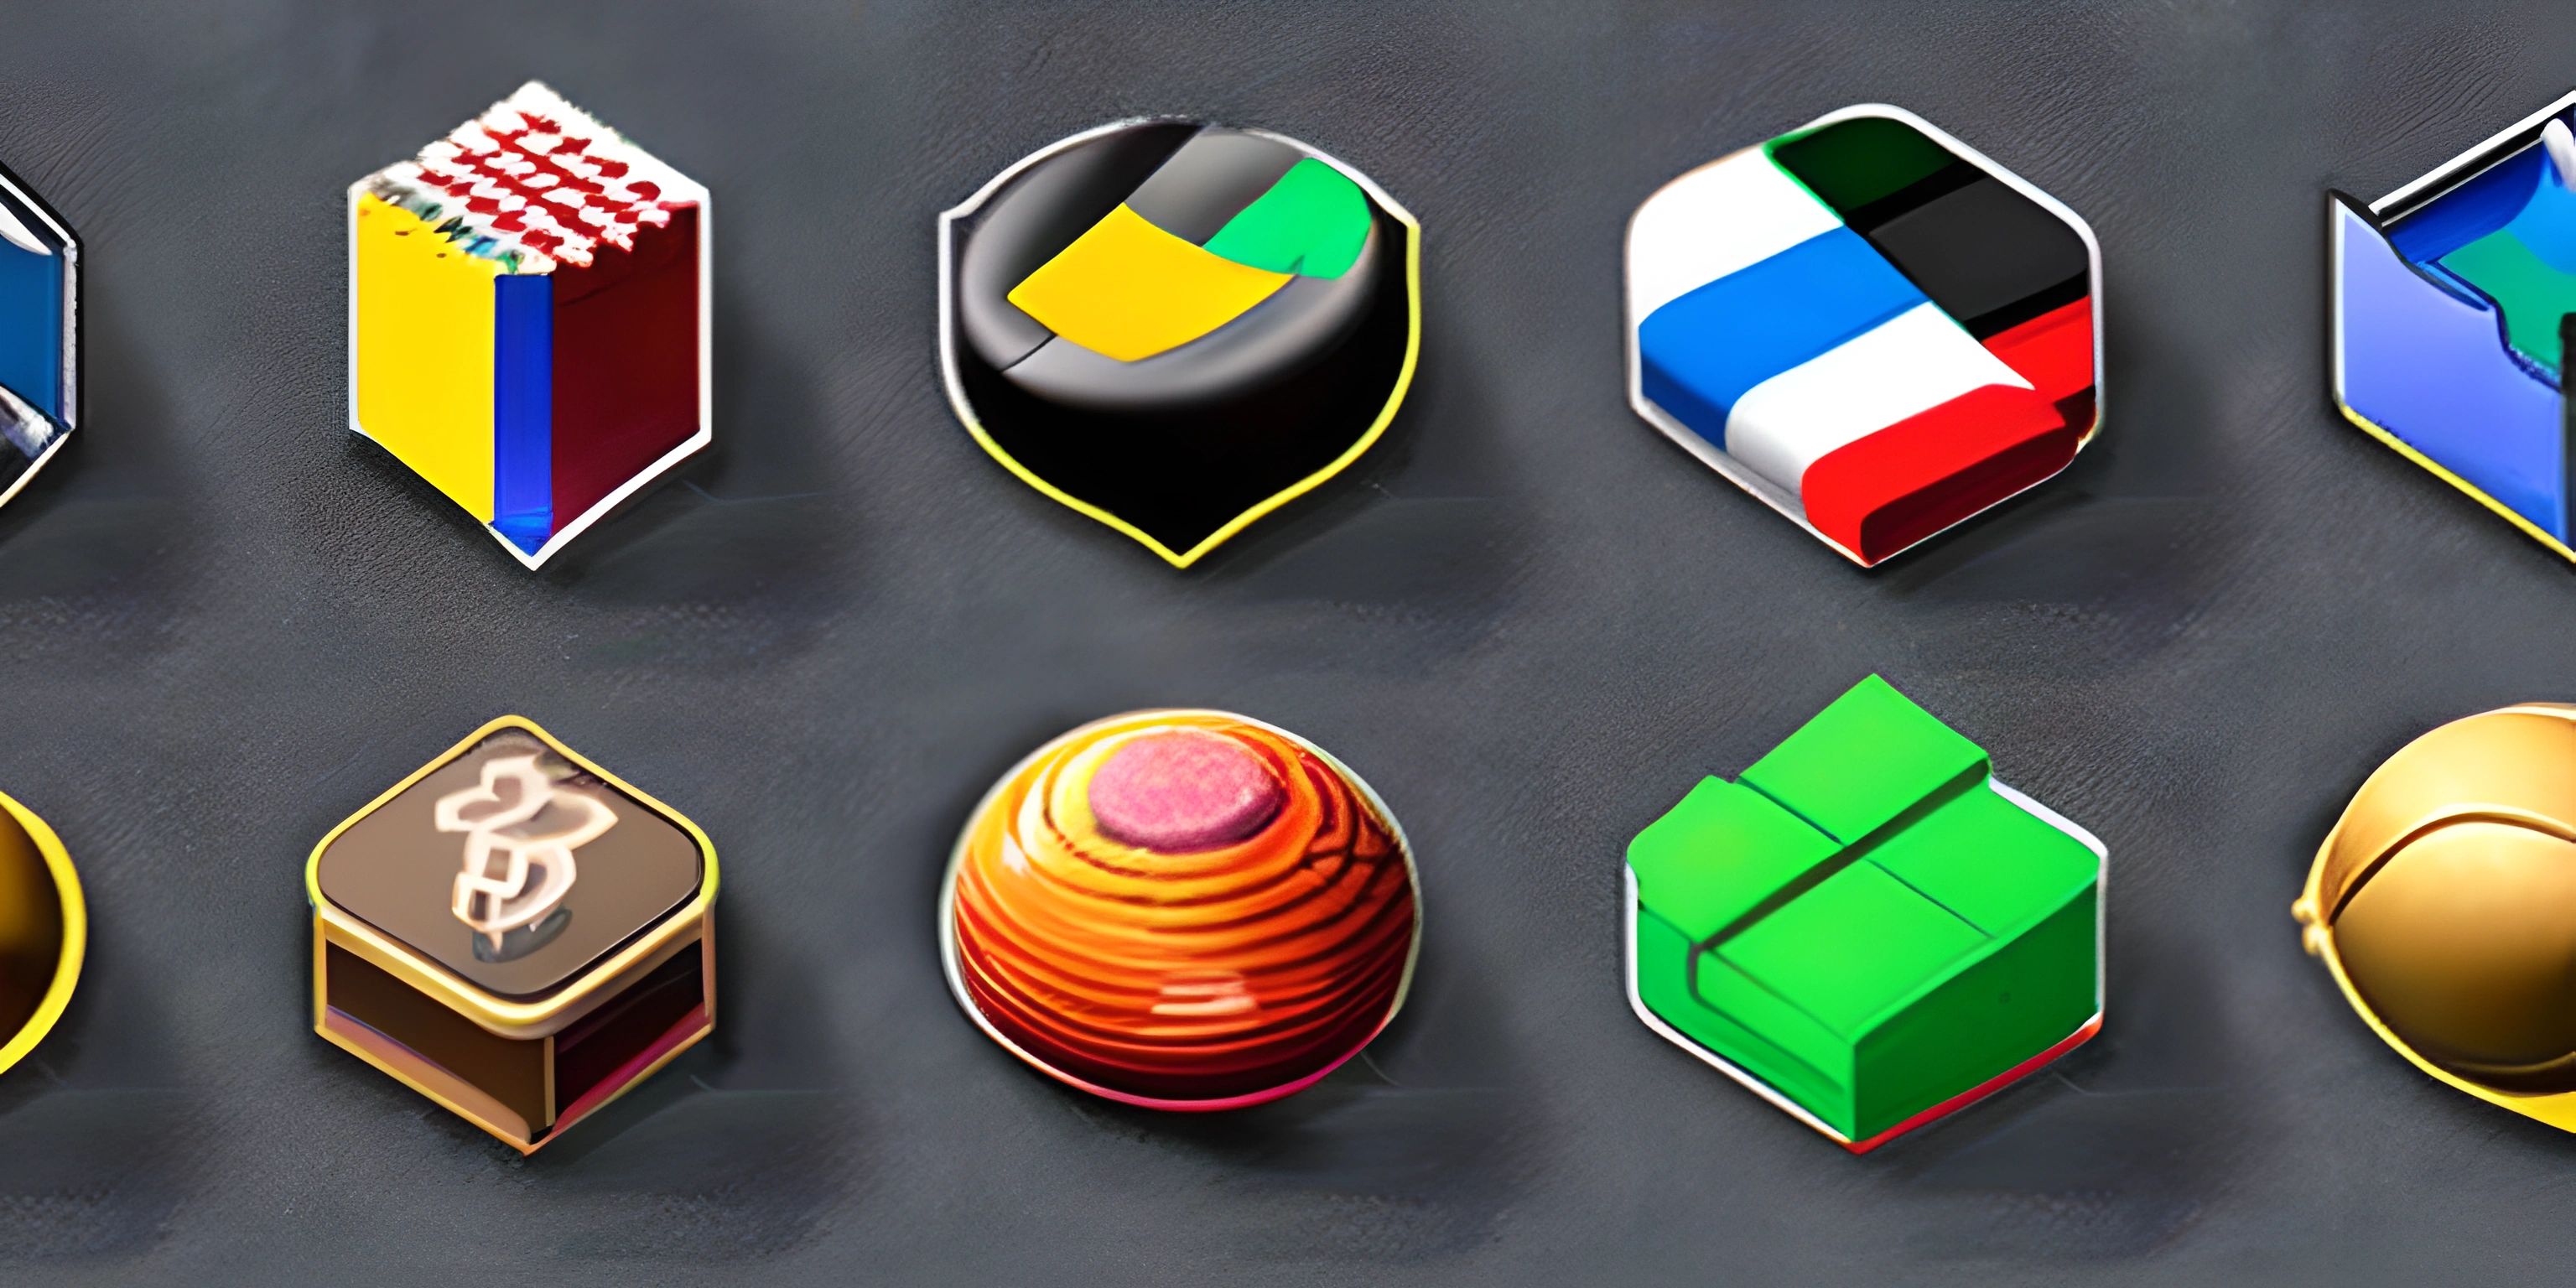 this is some icons on a table on a black surface that includes various colorful shapes